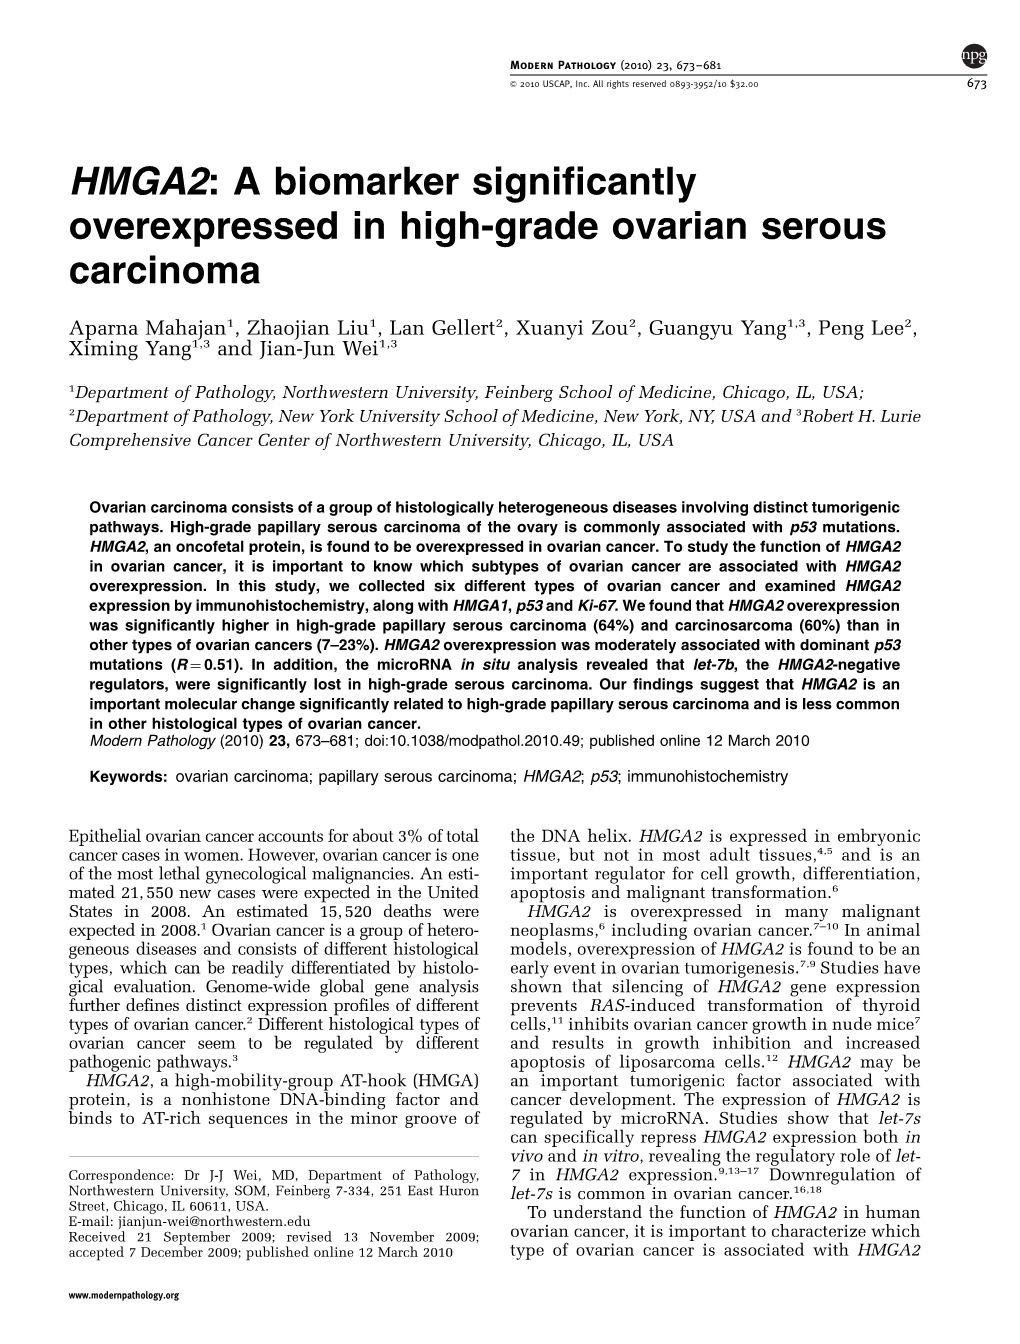 HMGA2: a Biomarker Significantly Overexpressed in High-Grade Ovarian Serous Carcinoma